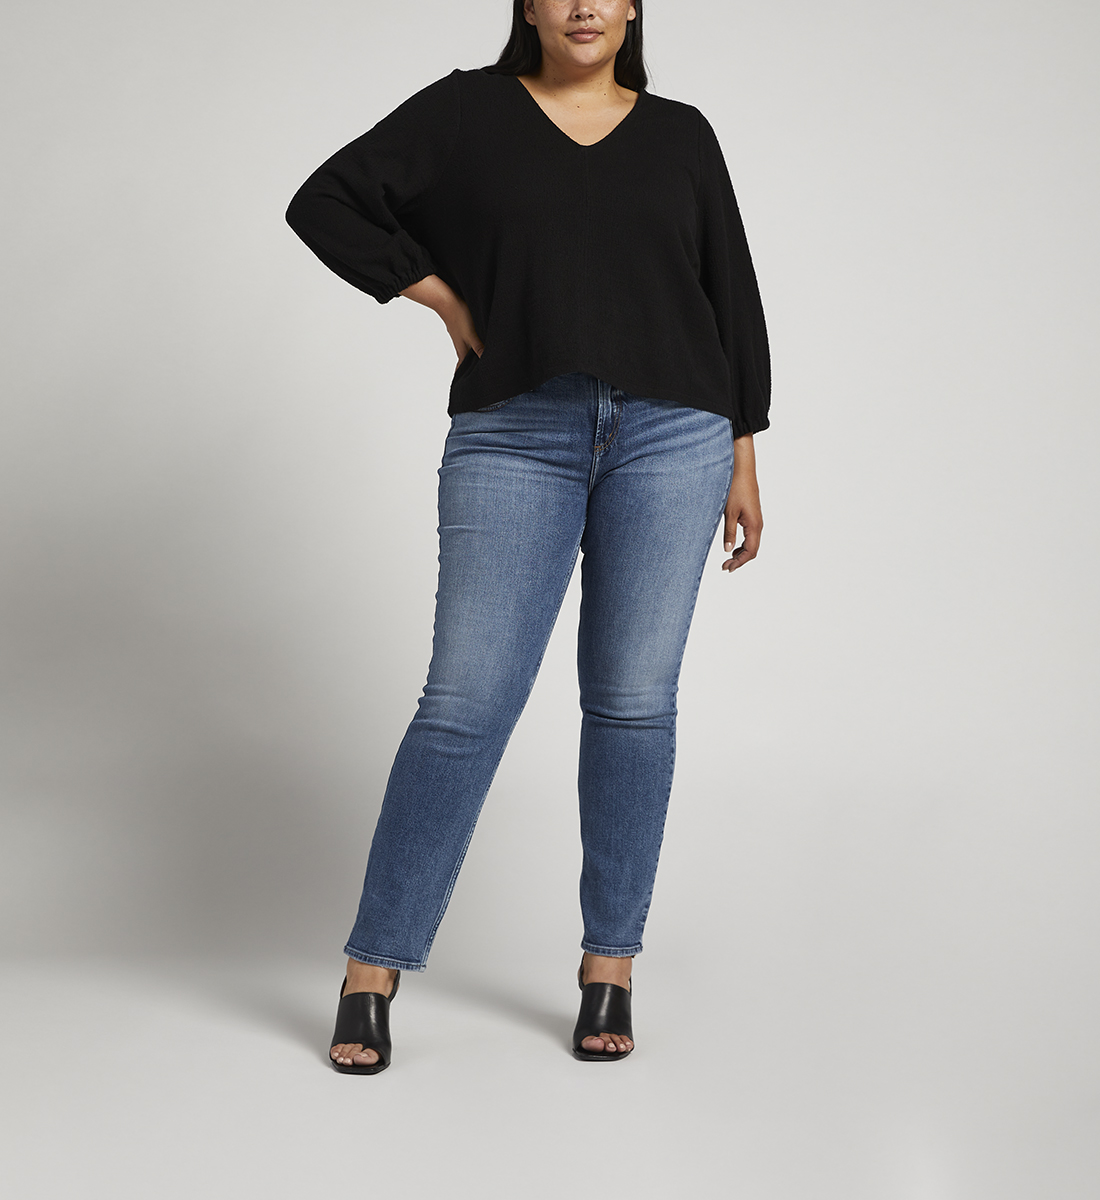 Silver Jeans Most Wanted Mid Rise Straight Leg Jeans Plus Size